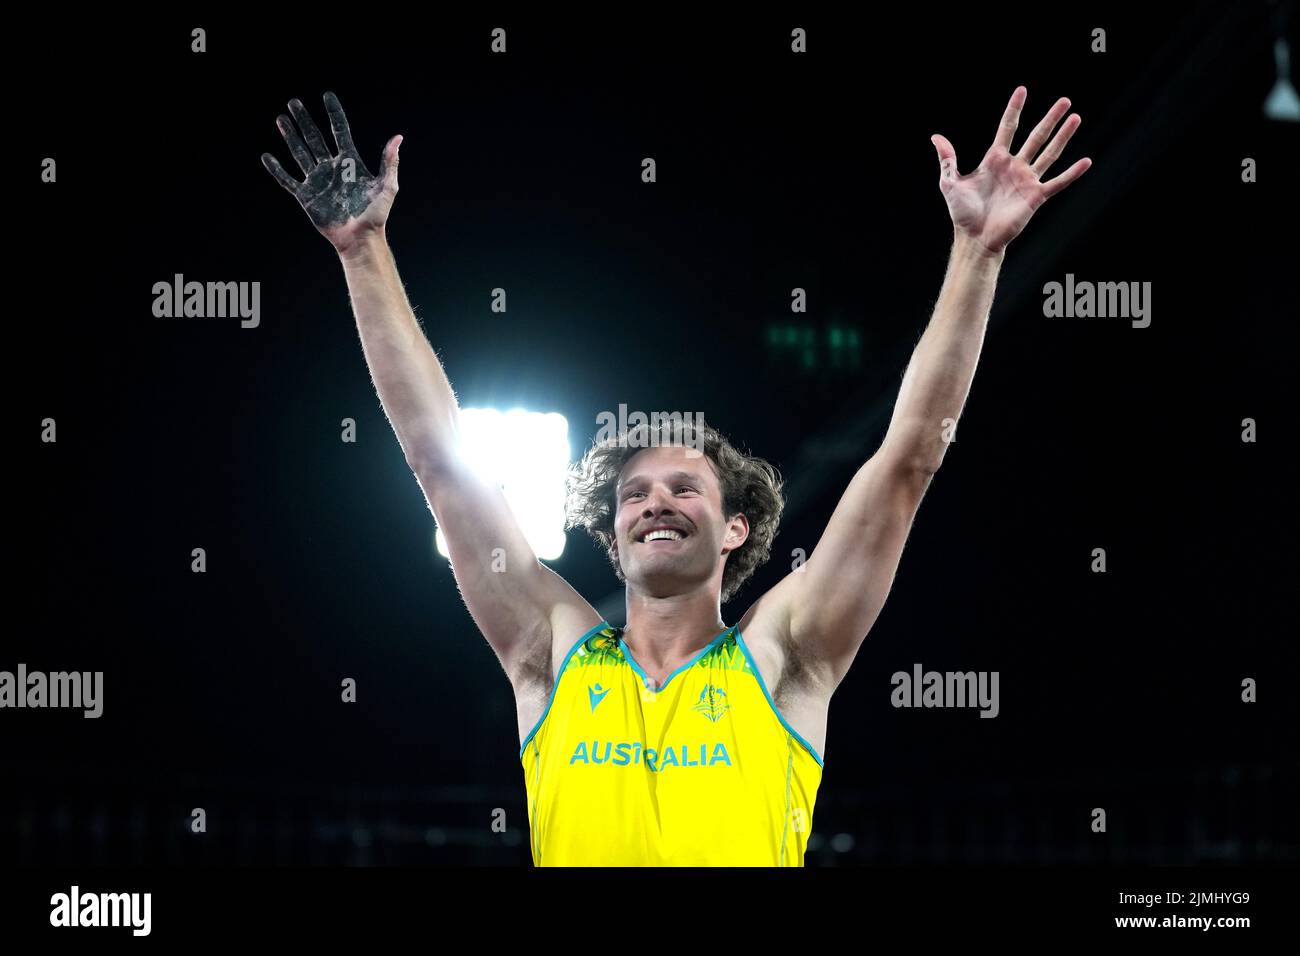 Australia's Kurtis Marschall celebrates winning gold in the Men's Pole Vault Final at Alexander Stadium on day nine of the 2022 Commonwealth Games in Birmingham. Picture date: Saturday August 6, 2022. Stock Photo